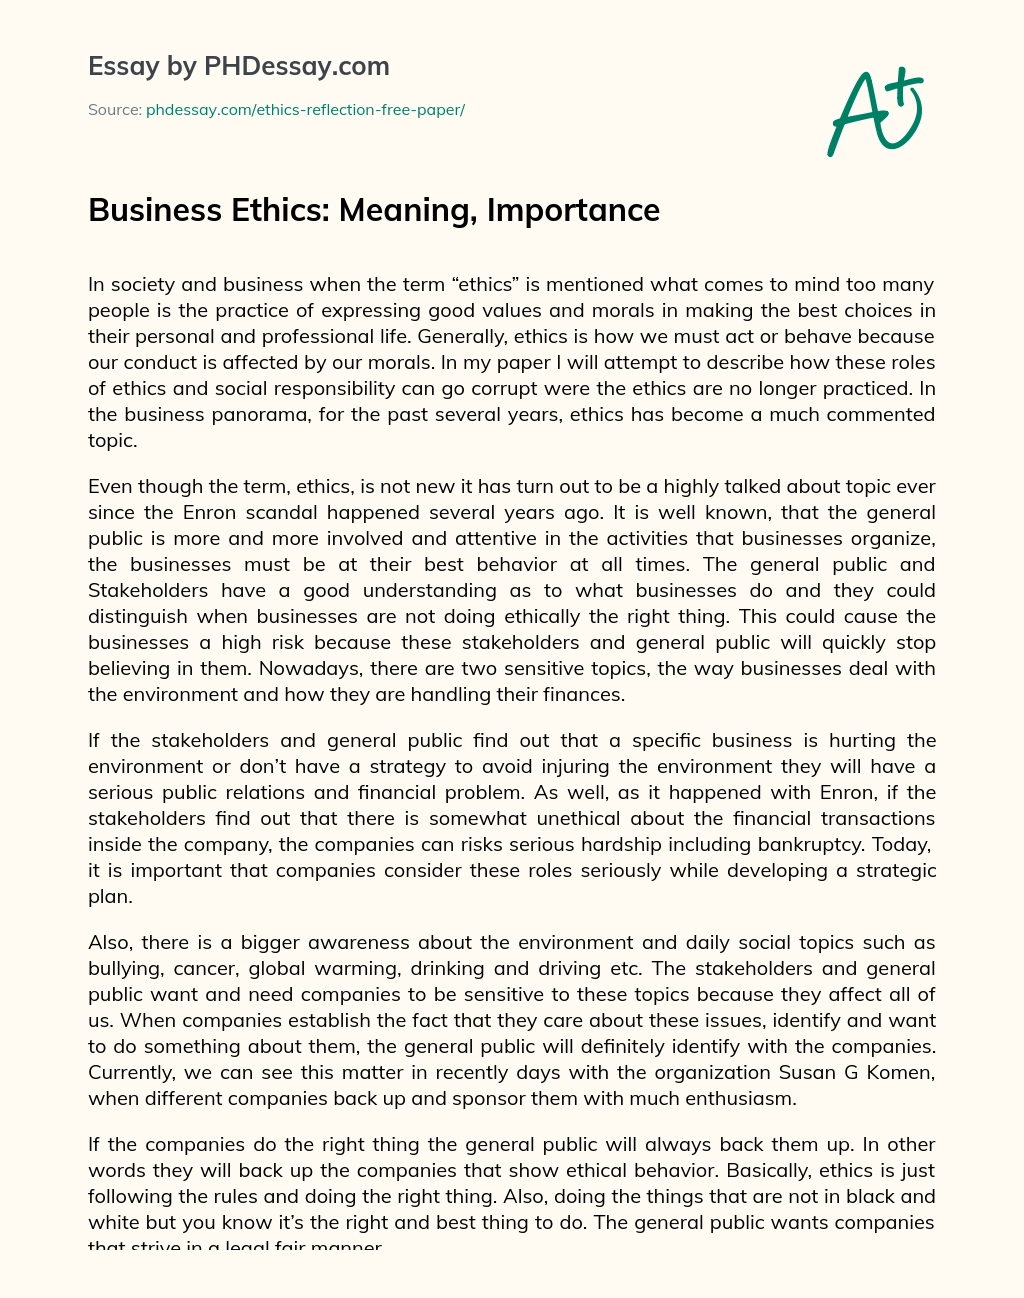 essay about ethics in business